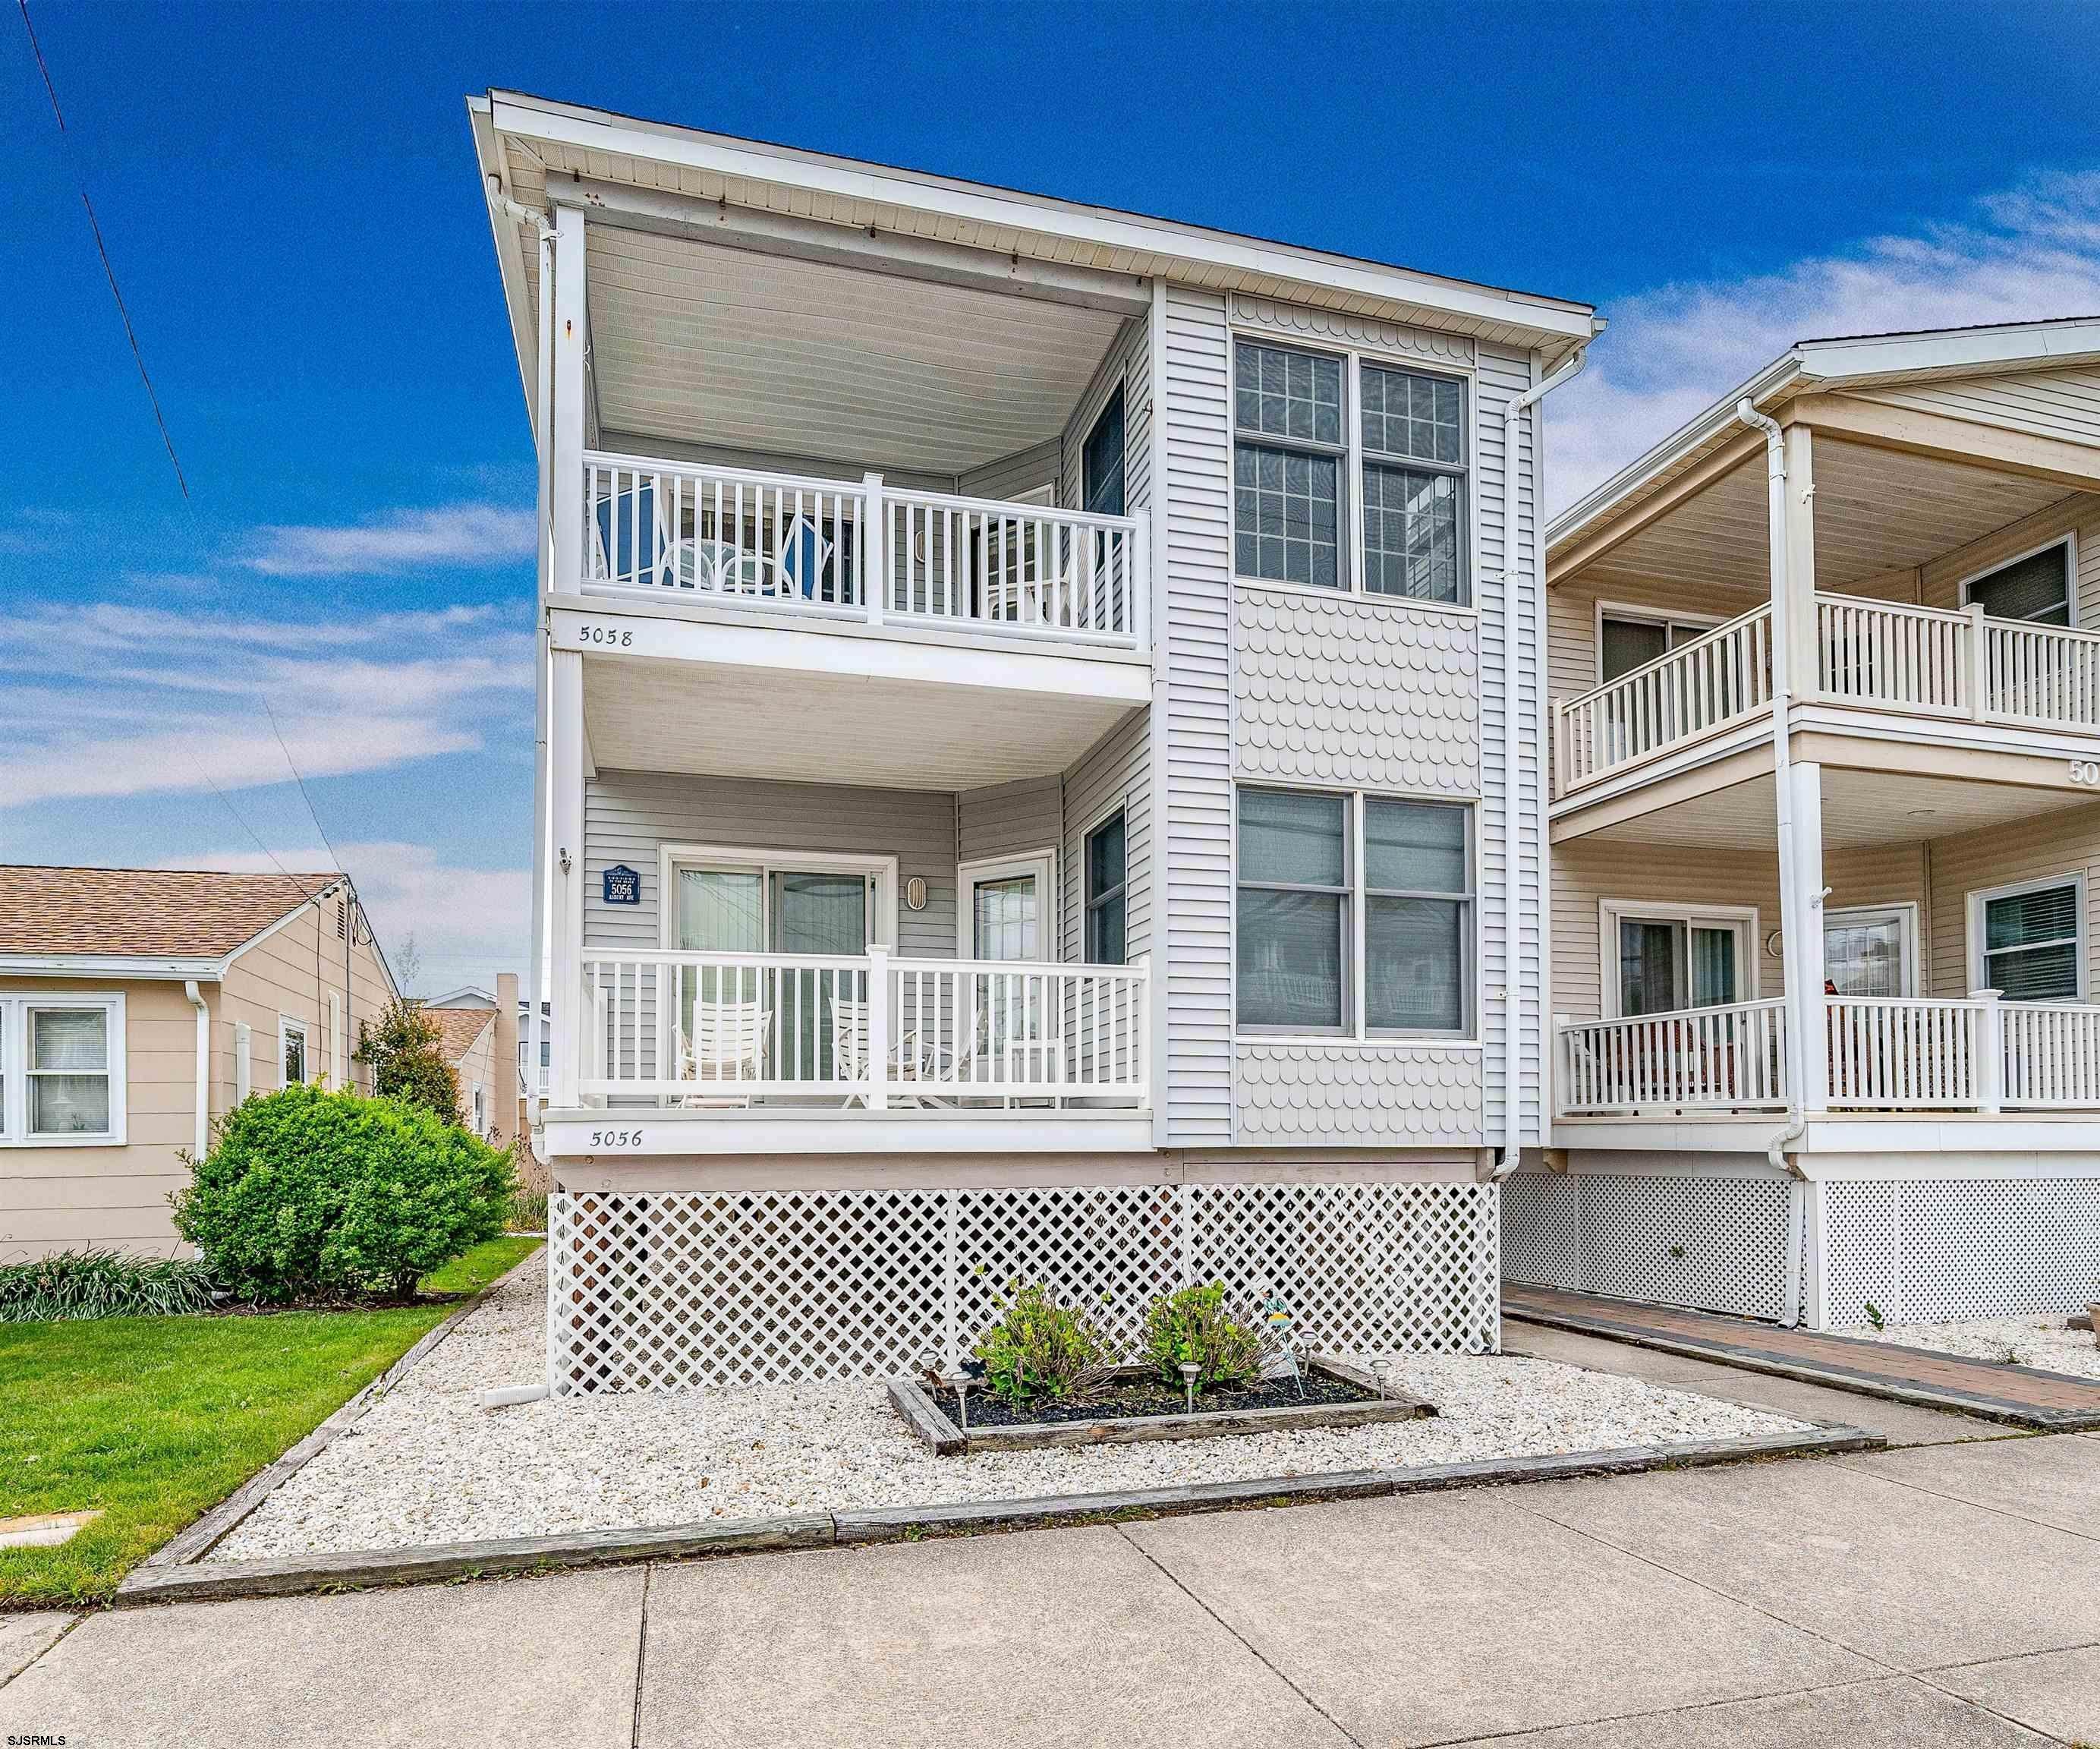 1. Condominiums for Sale at 5058 Asbury Avenue Ocean City, New Jersey 08226 United States